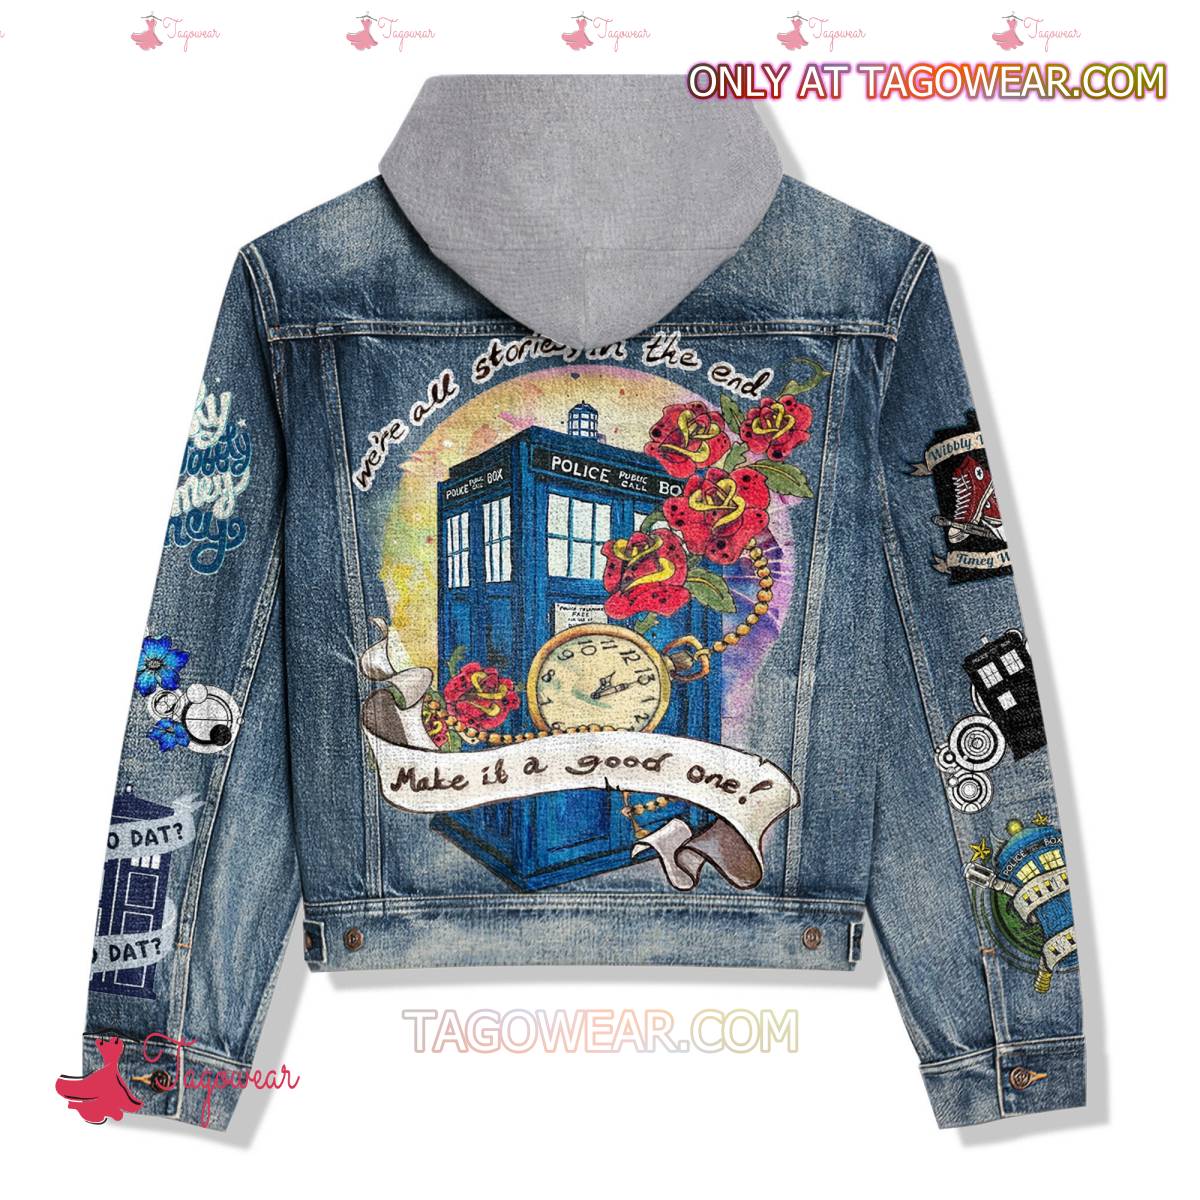 Doctor Who Make It A Good One Jean Hoodie Jacket a